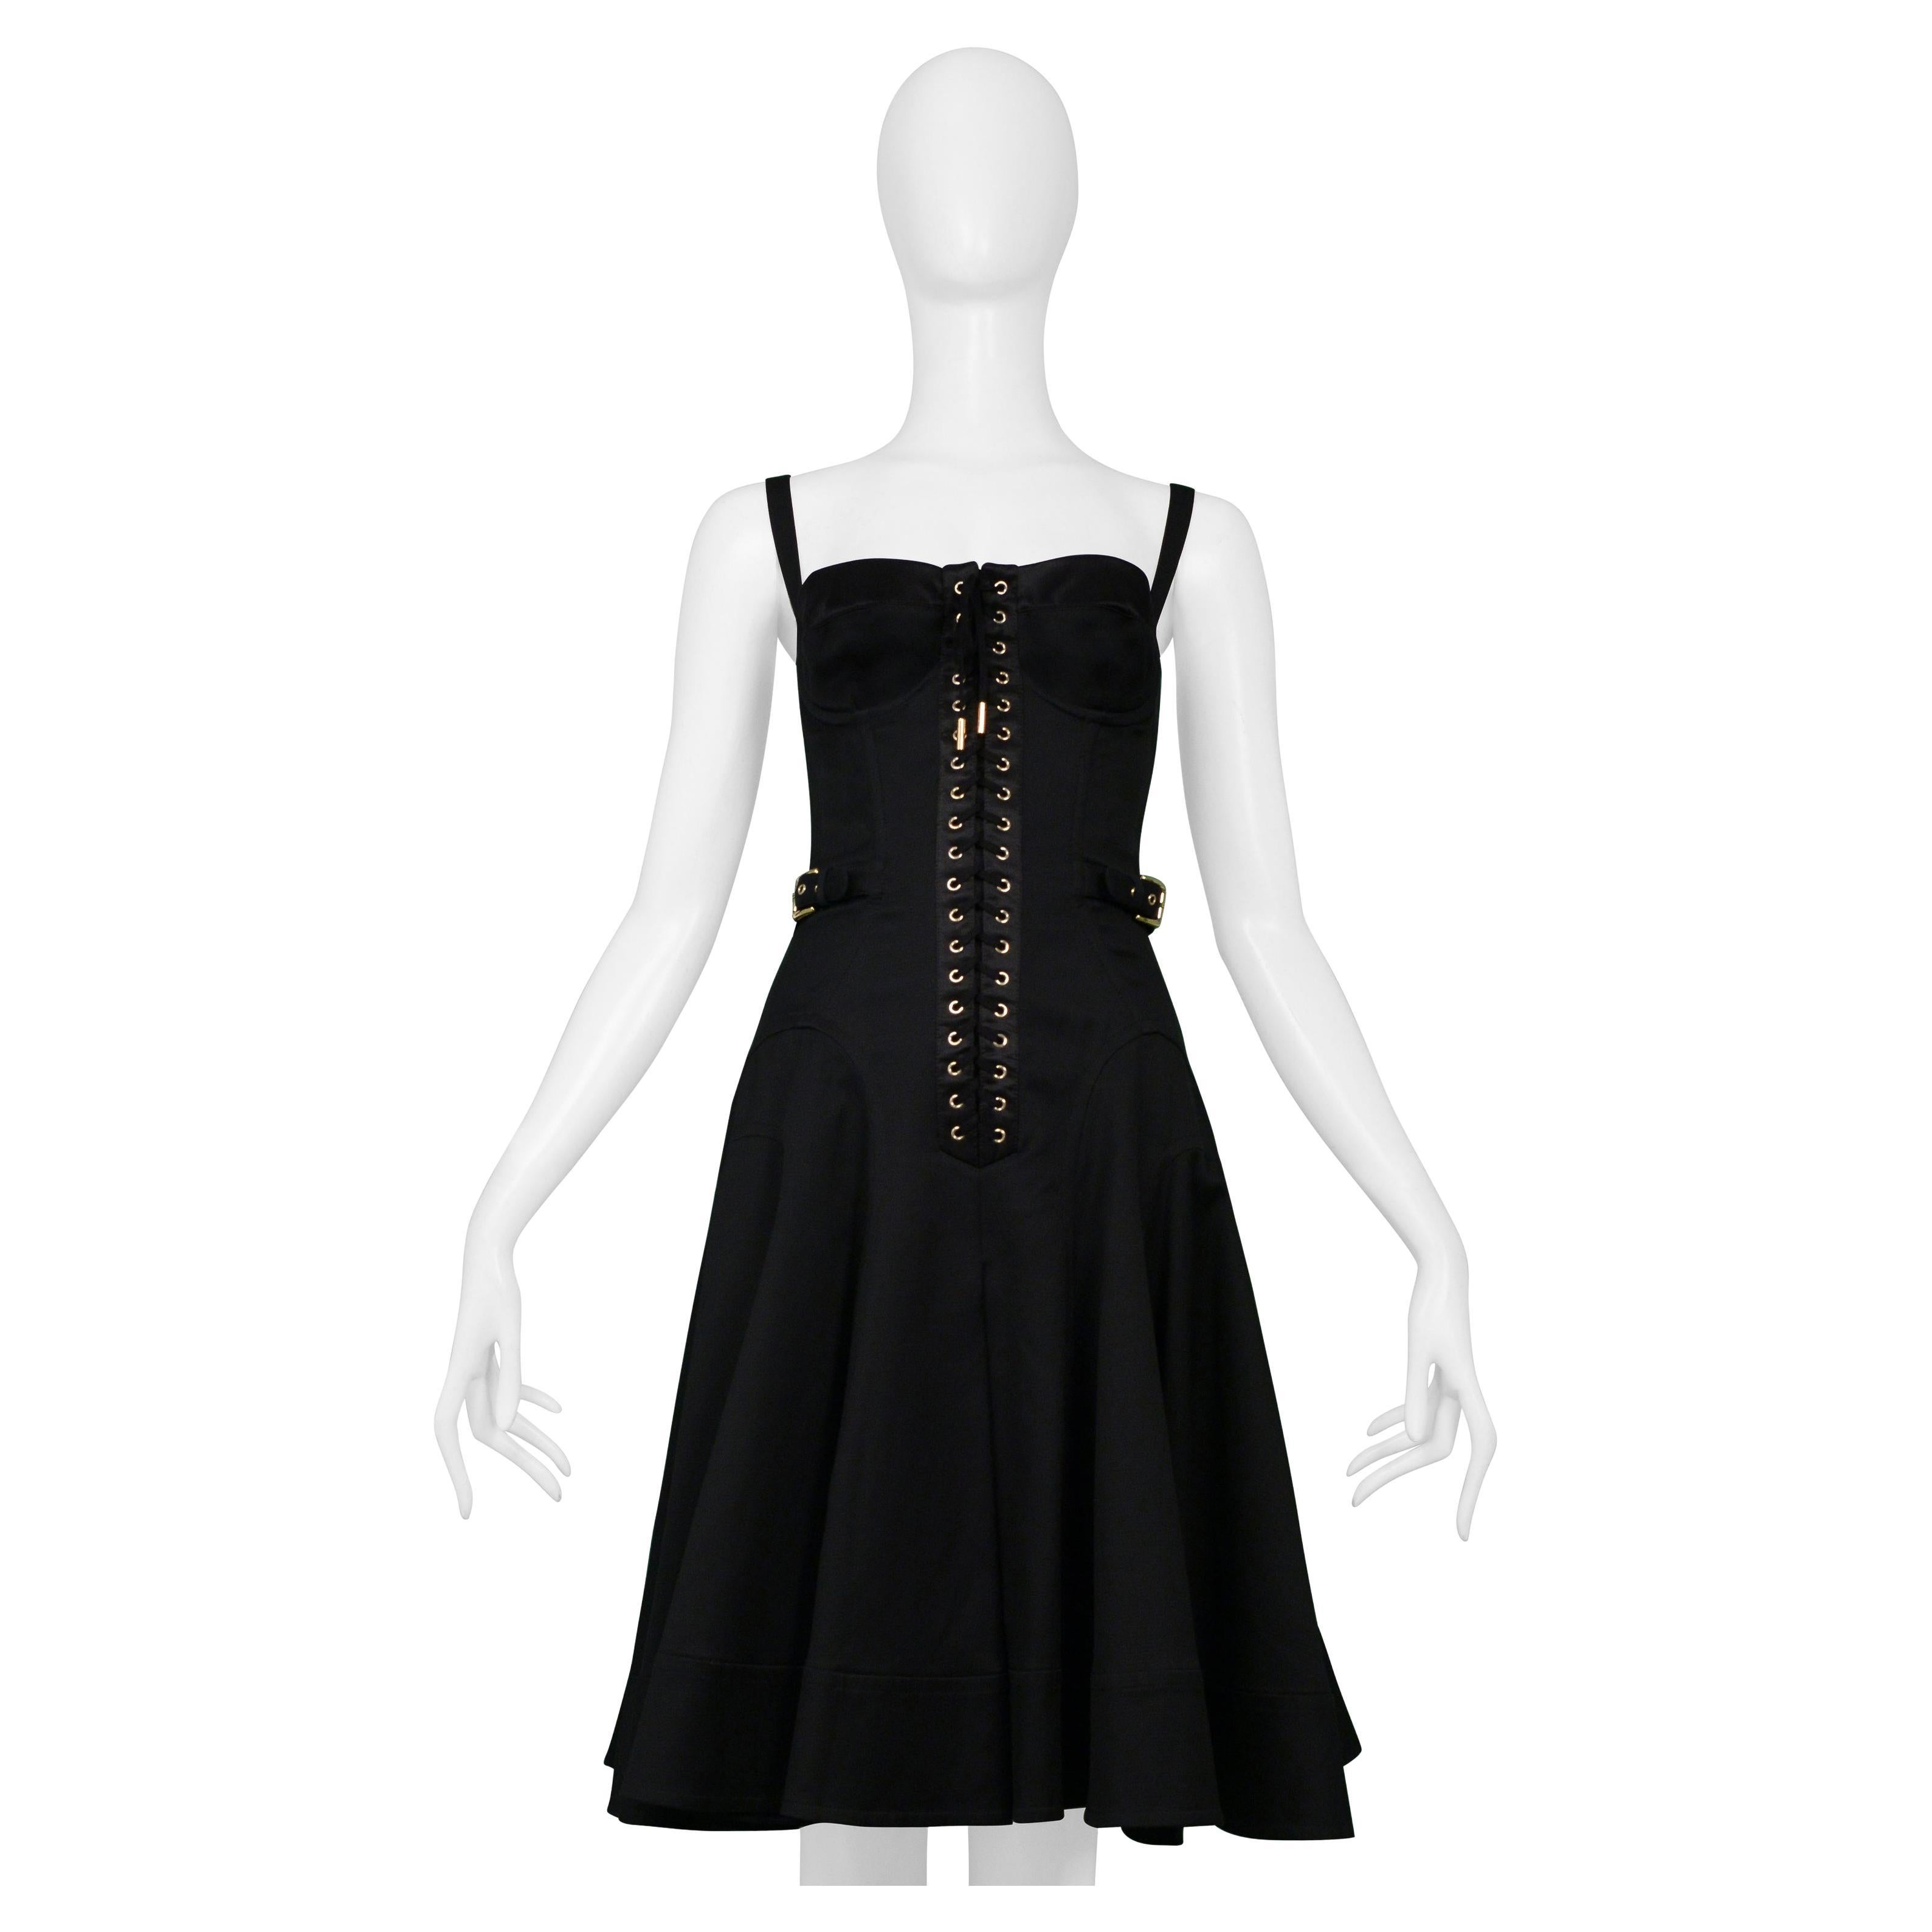 Docle & Gabbana Black Corset Dress With Buckles For Sale